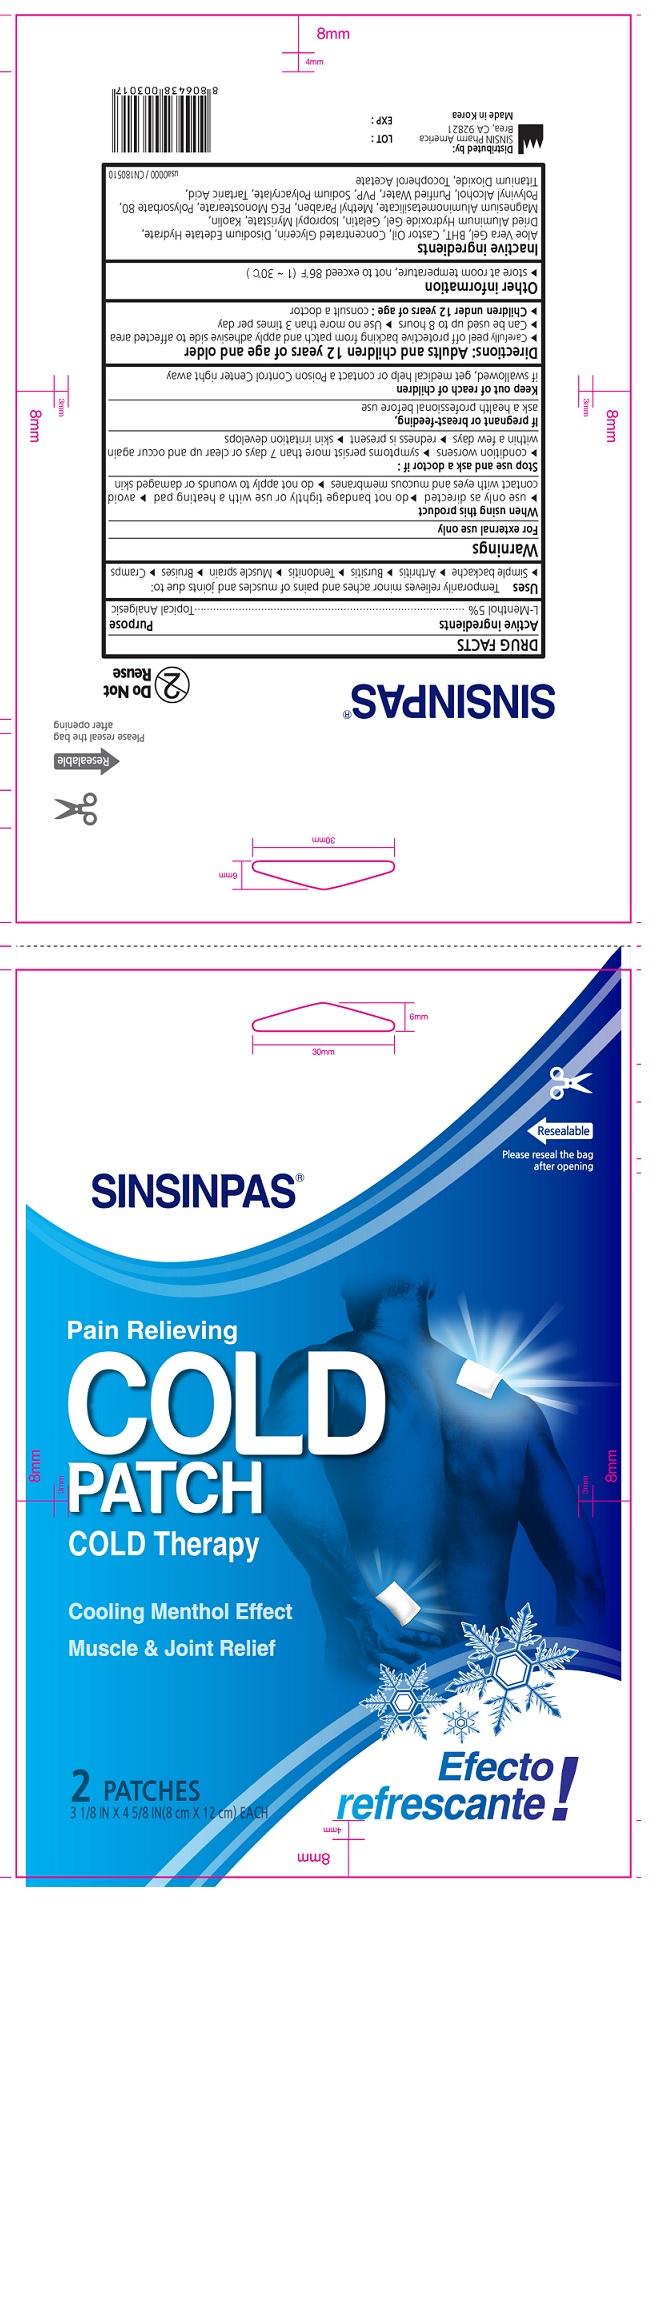 cold patch